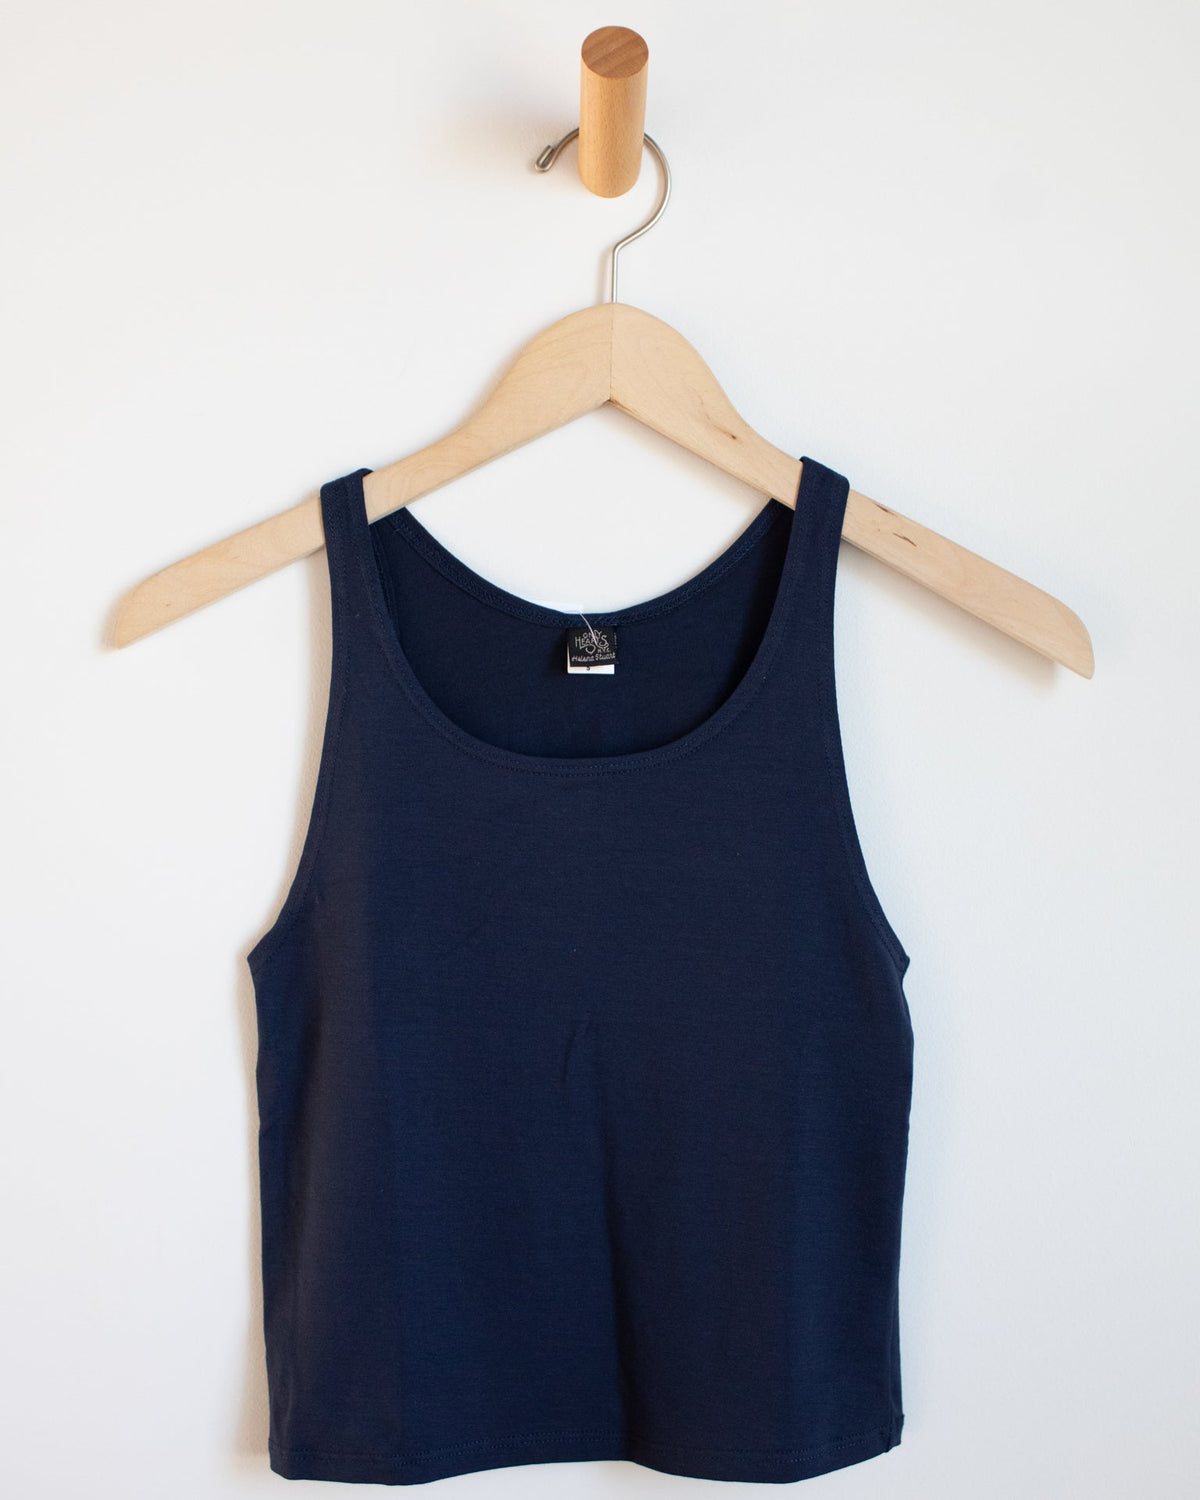 Only Hearts Clothing SF Muscle T in Navy